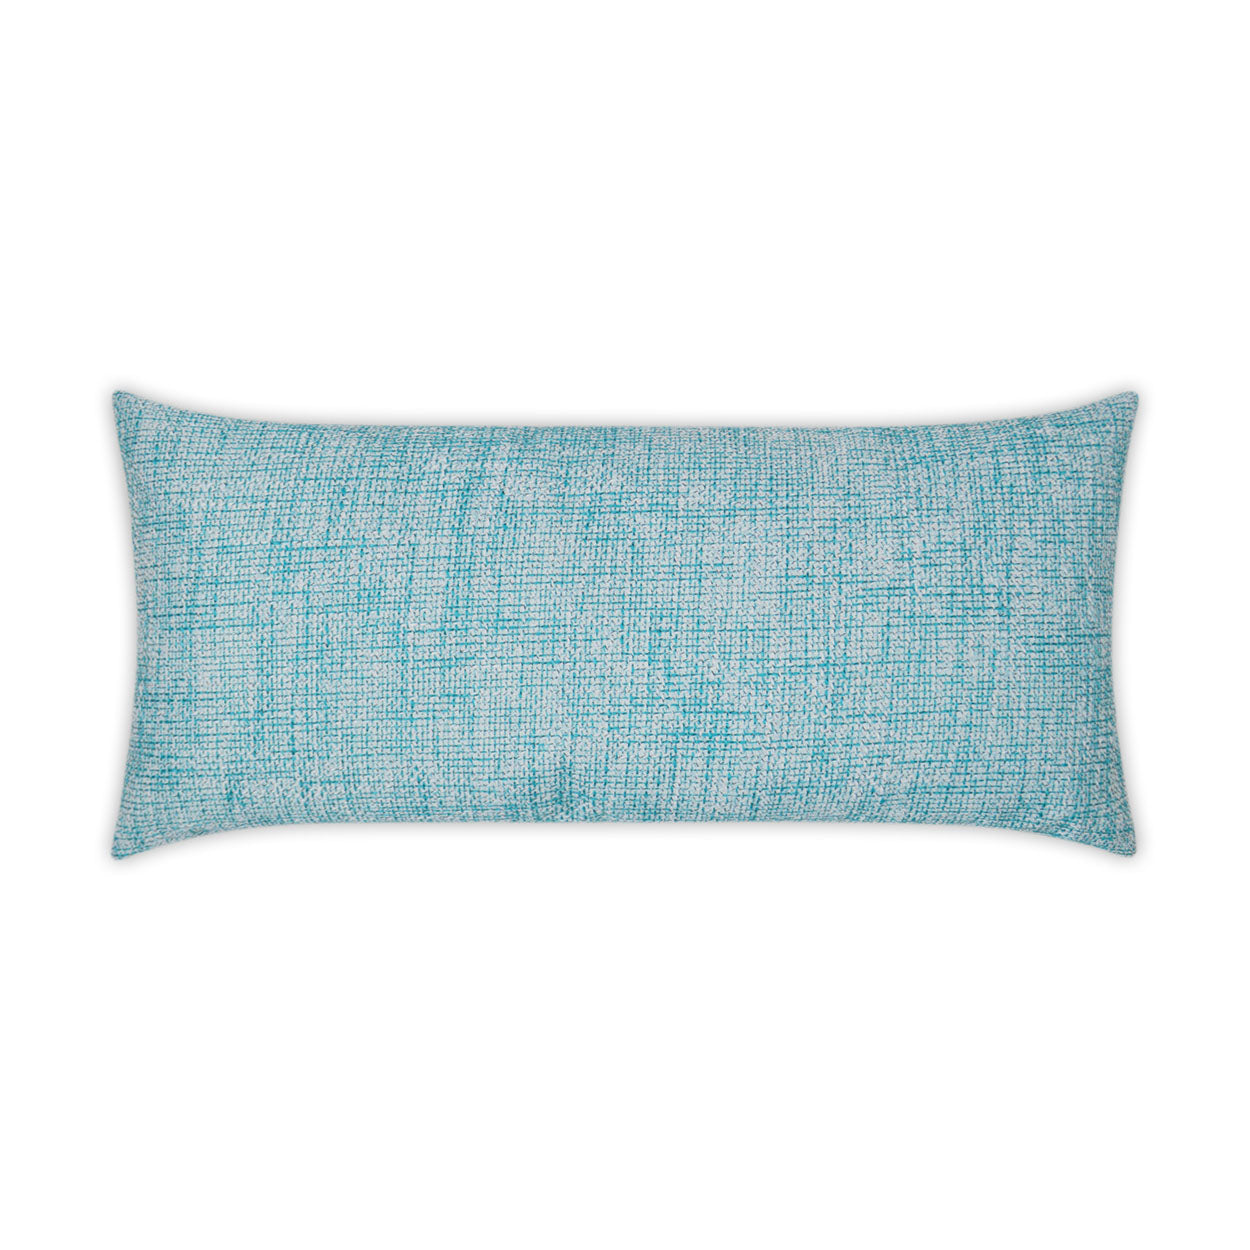 Outdoor Double Trouble Lumbar Pillow - Turquoise